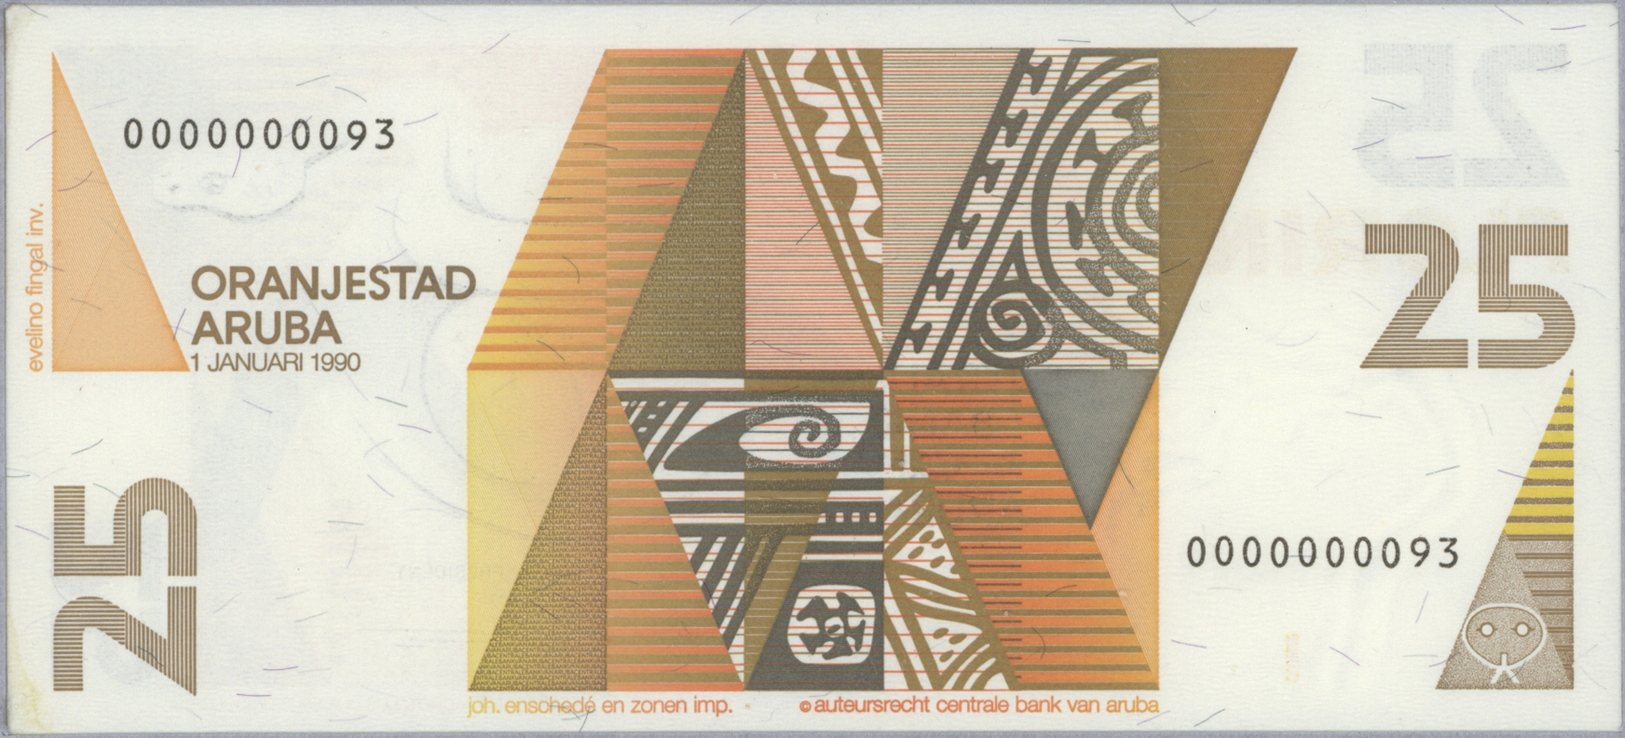 00063 Aruba: official collectors book issued by the Central Bank of Aruba commemorating the first Banknote series of Nat